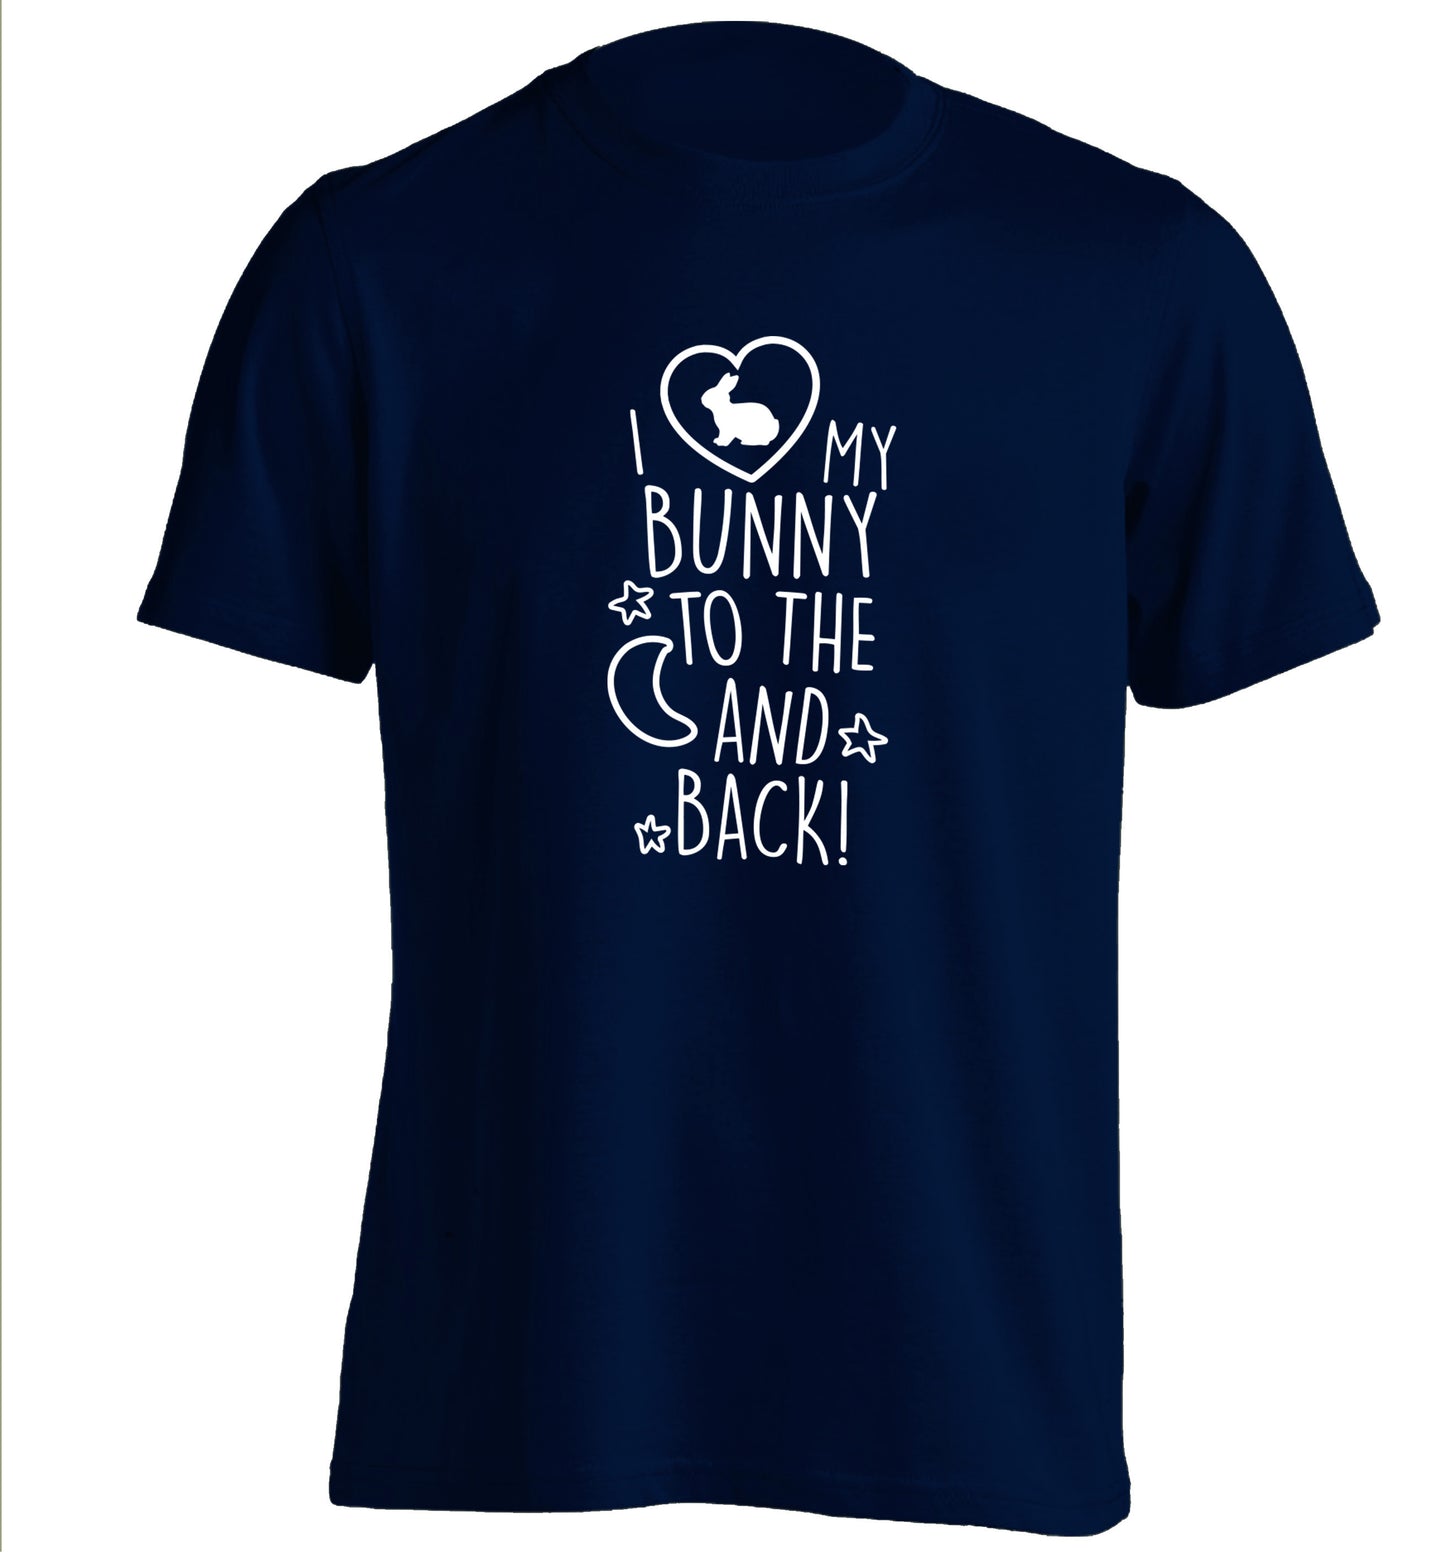 I love my bunny to the moon and back adults unisex navy Tshirt 2XL